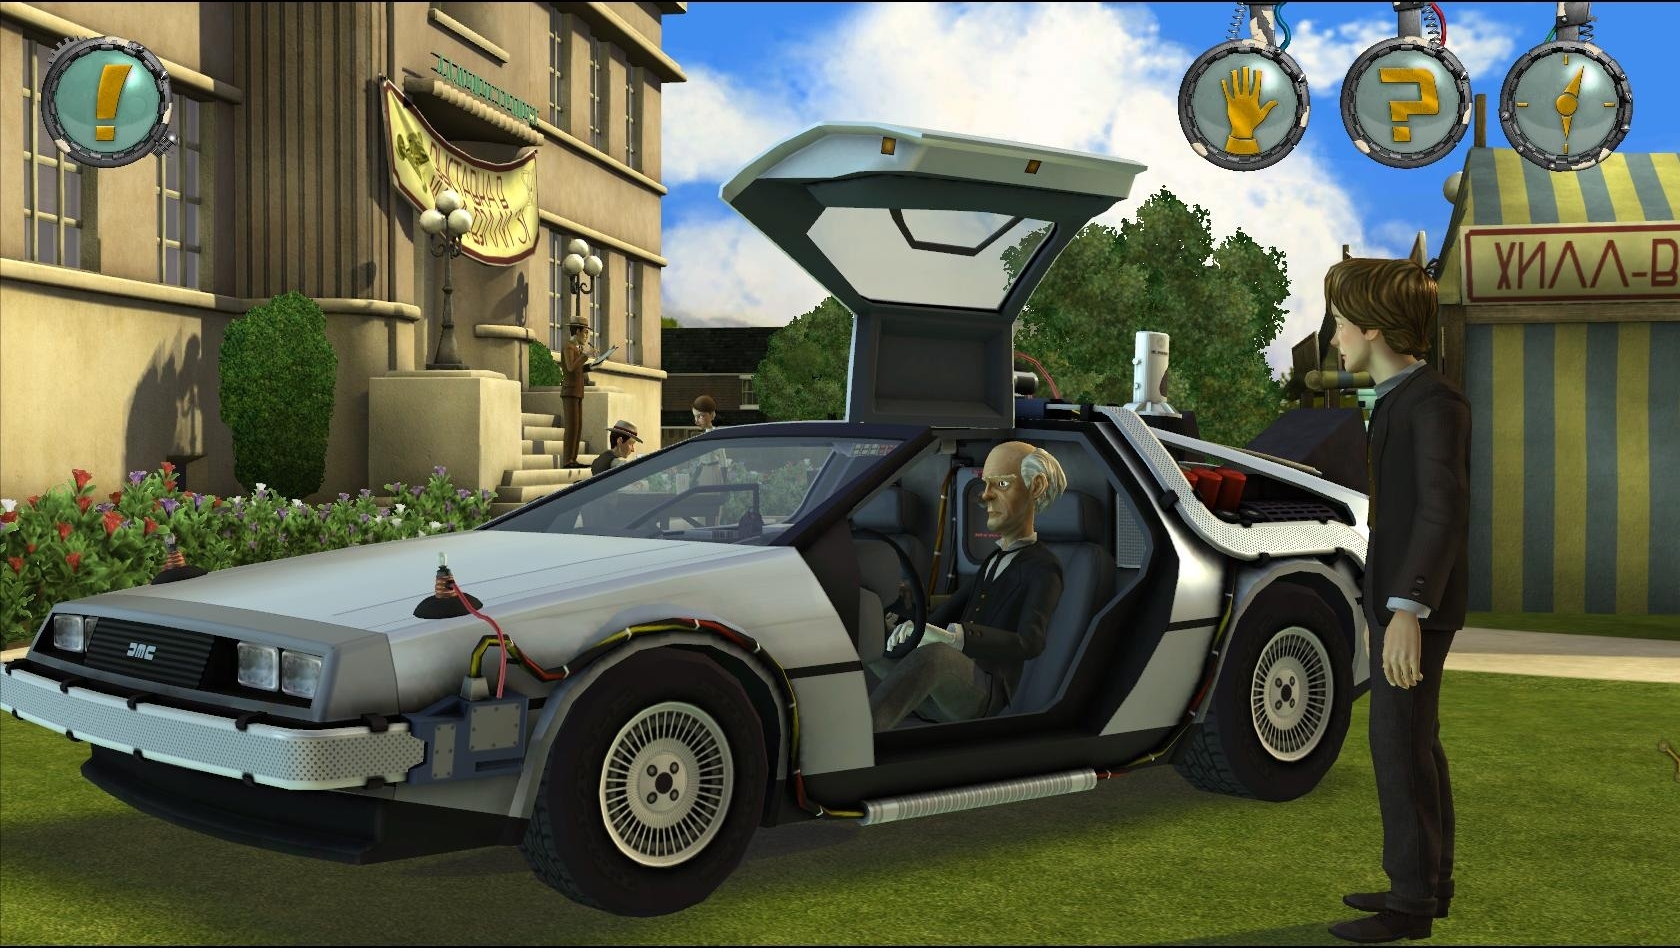 Такую игру часть 2. Back to the Future игра. Back to the Future (игра, 1985). Back to the Future the game назад в будущее. Back to the Future 3 игра.